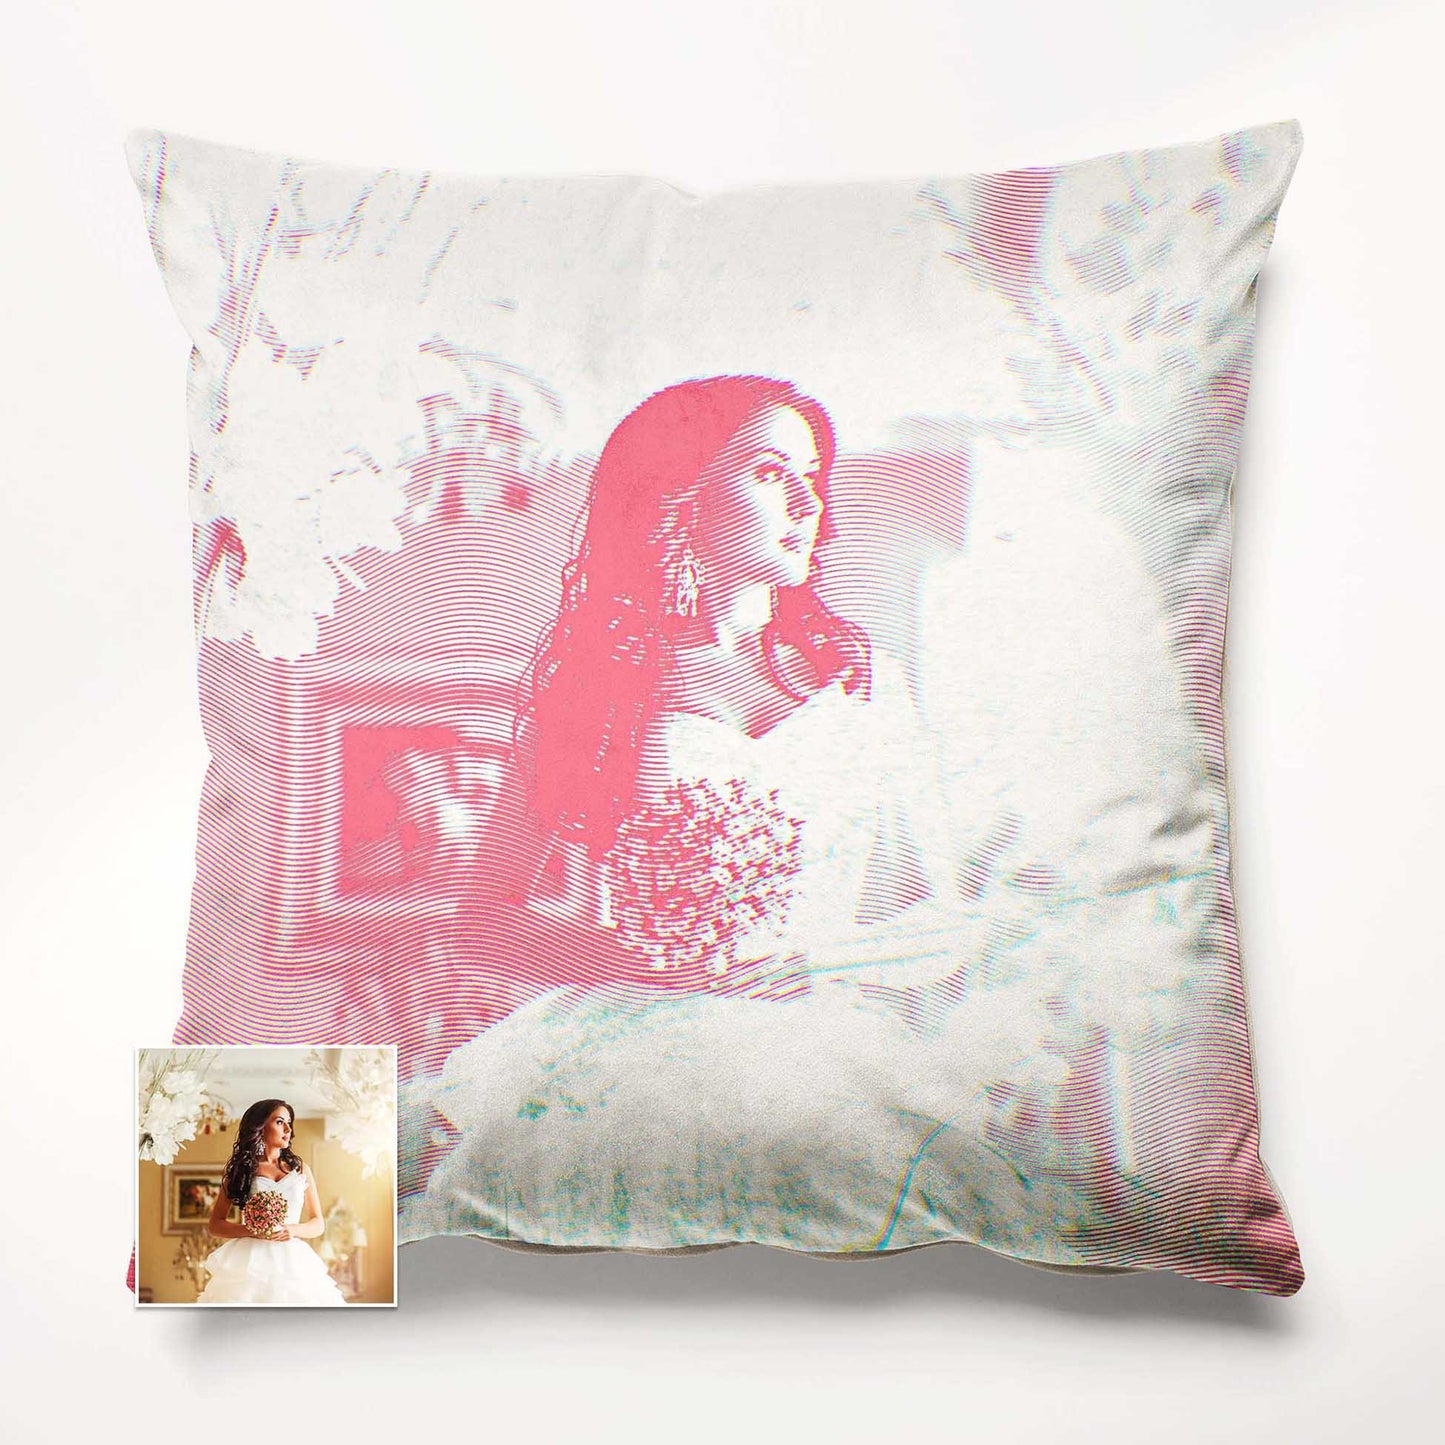 The Personalised Pink Engraving Cushion is a unique and cool home decor accessory that captures your imagination. With the ability to print from a photo, it offers a creative and original way to showcase your memories, handmade soft velvet